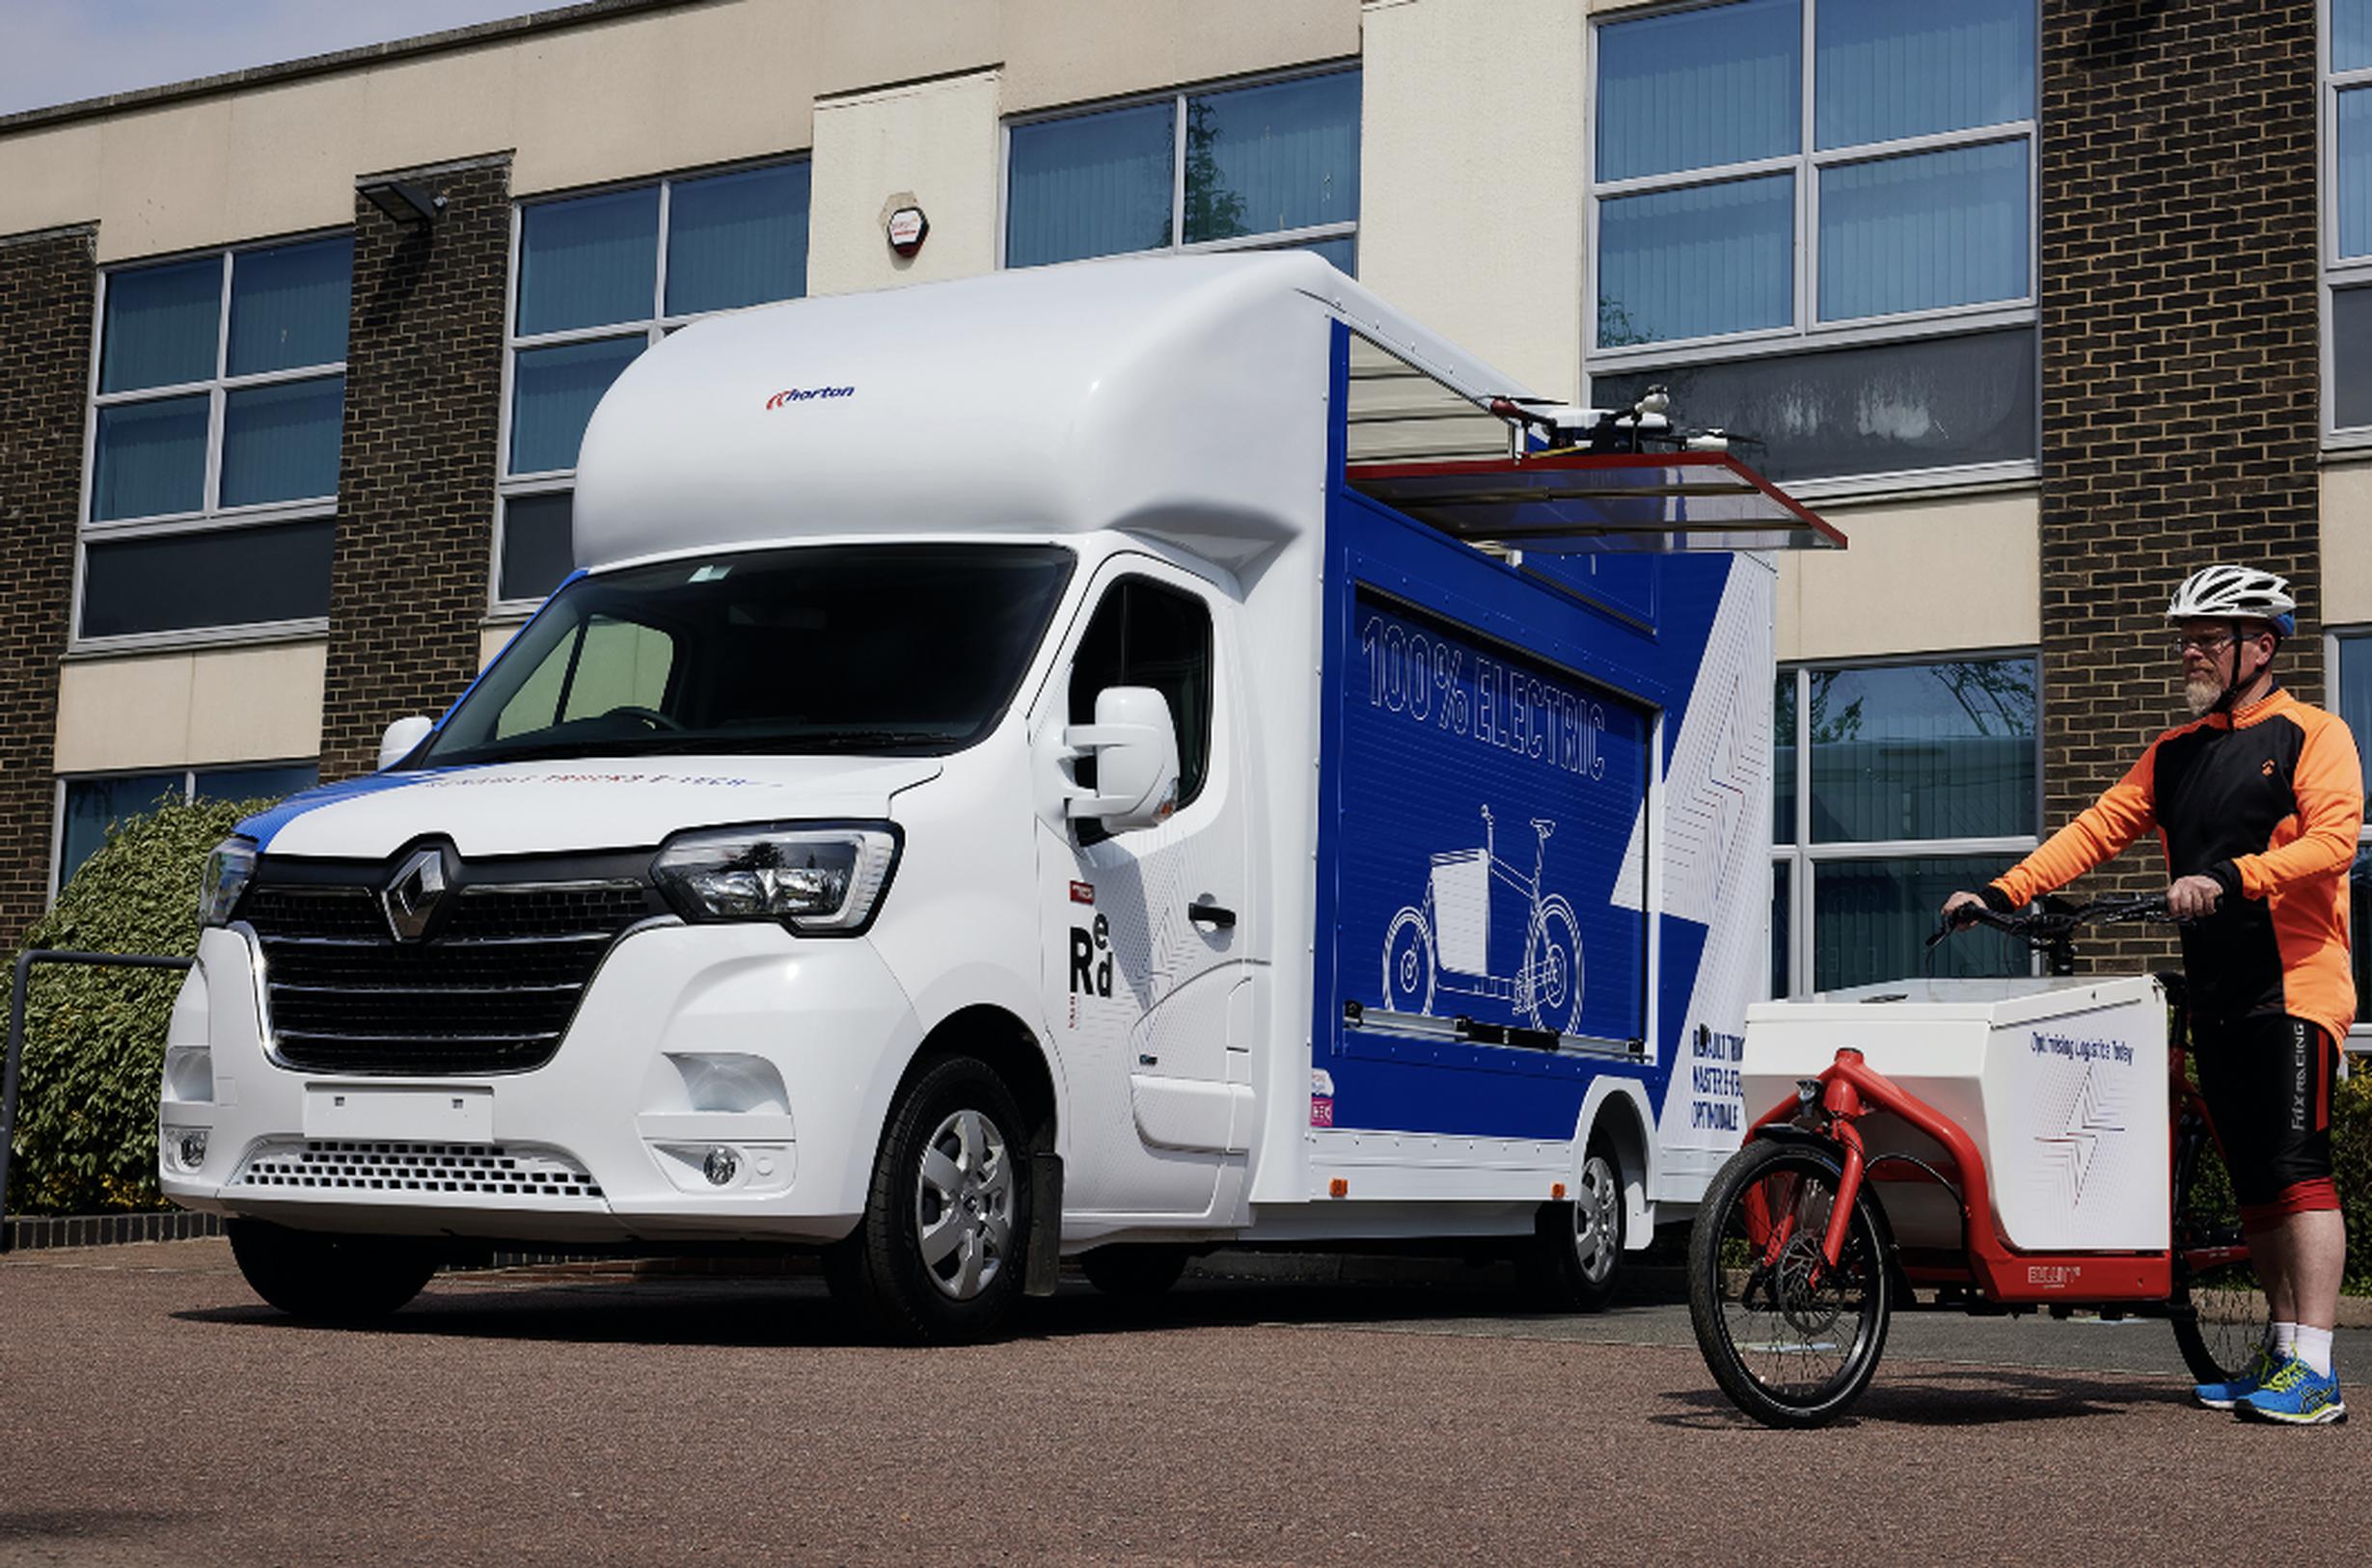 Renault’s multi-modal electric delivery concept combines van, cargo bike and drone